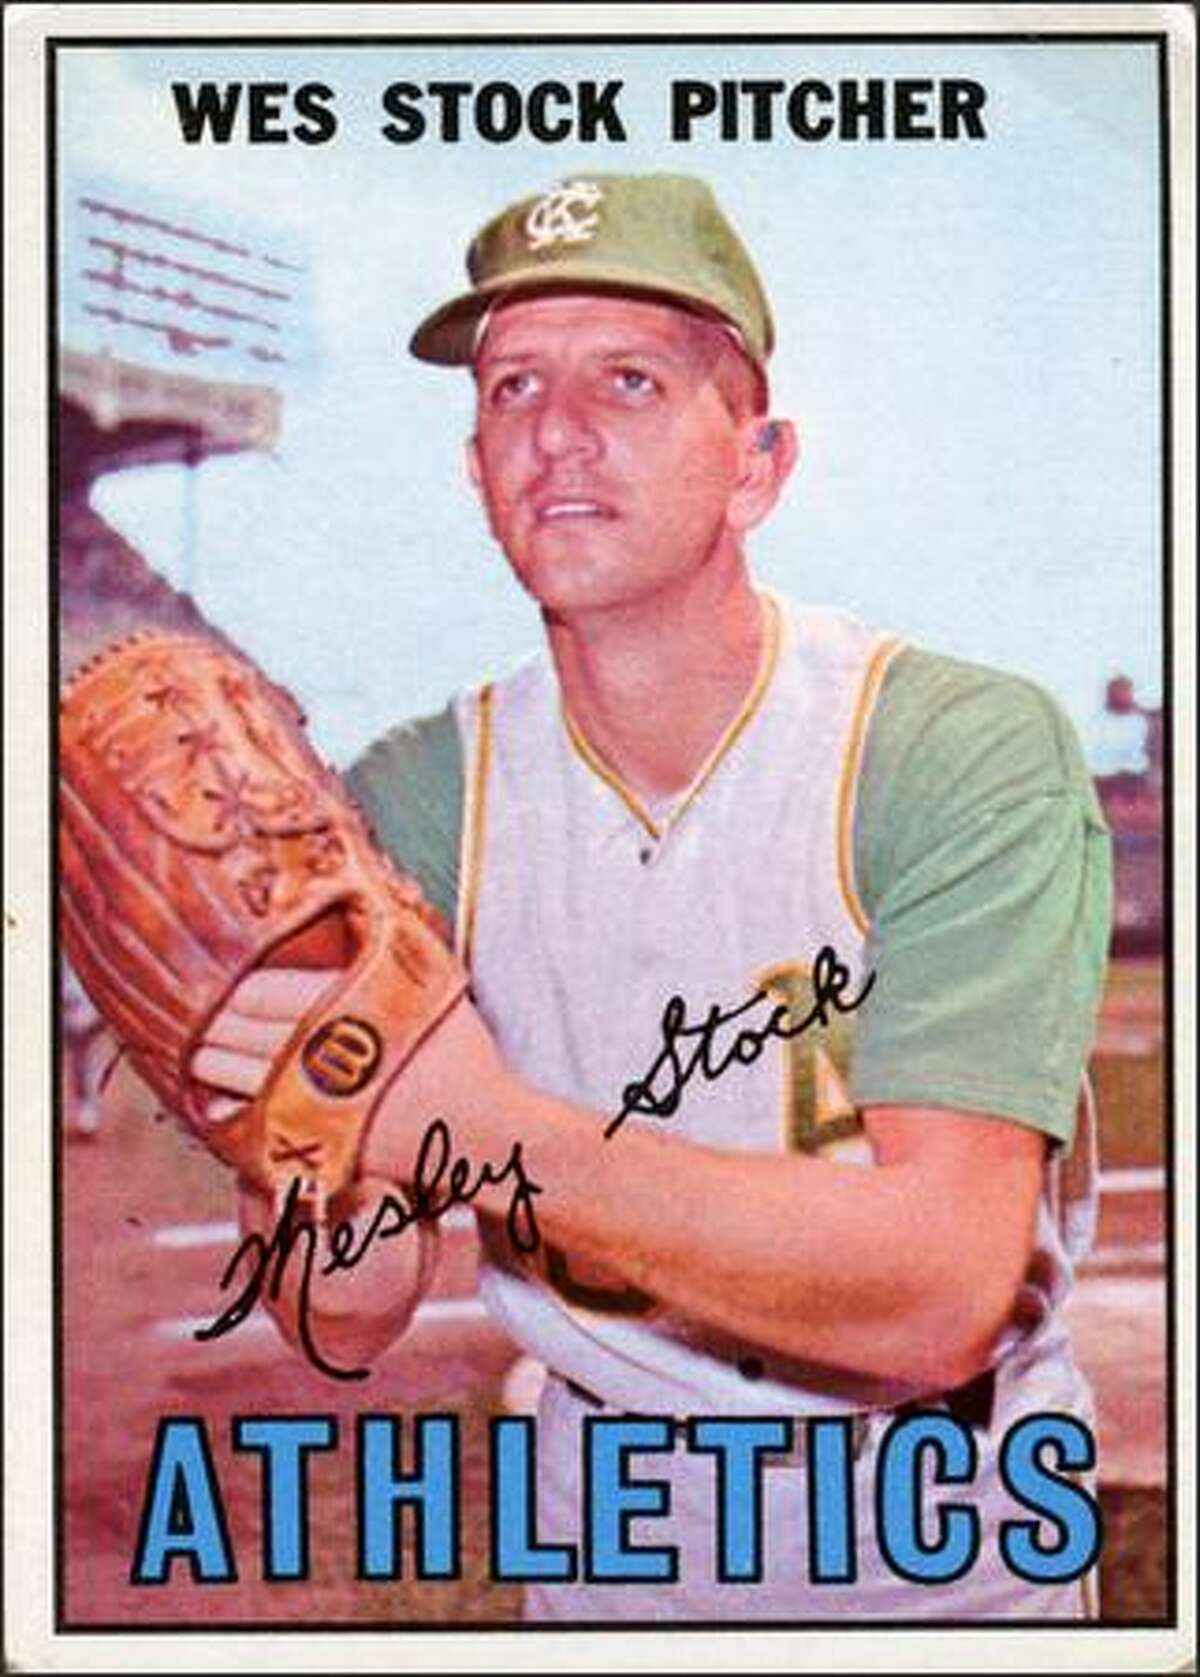 THEN: Stock pitched in nine big league seasons before retiring in 1967 and going into coaching.